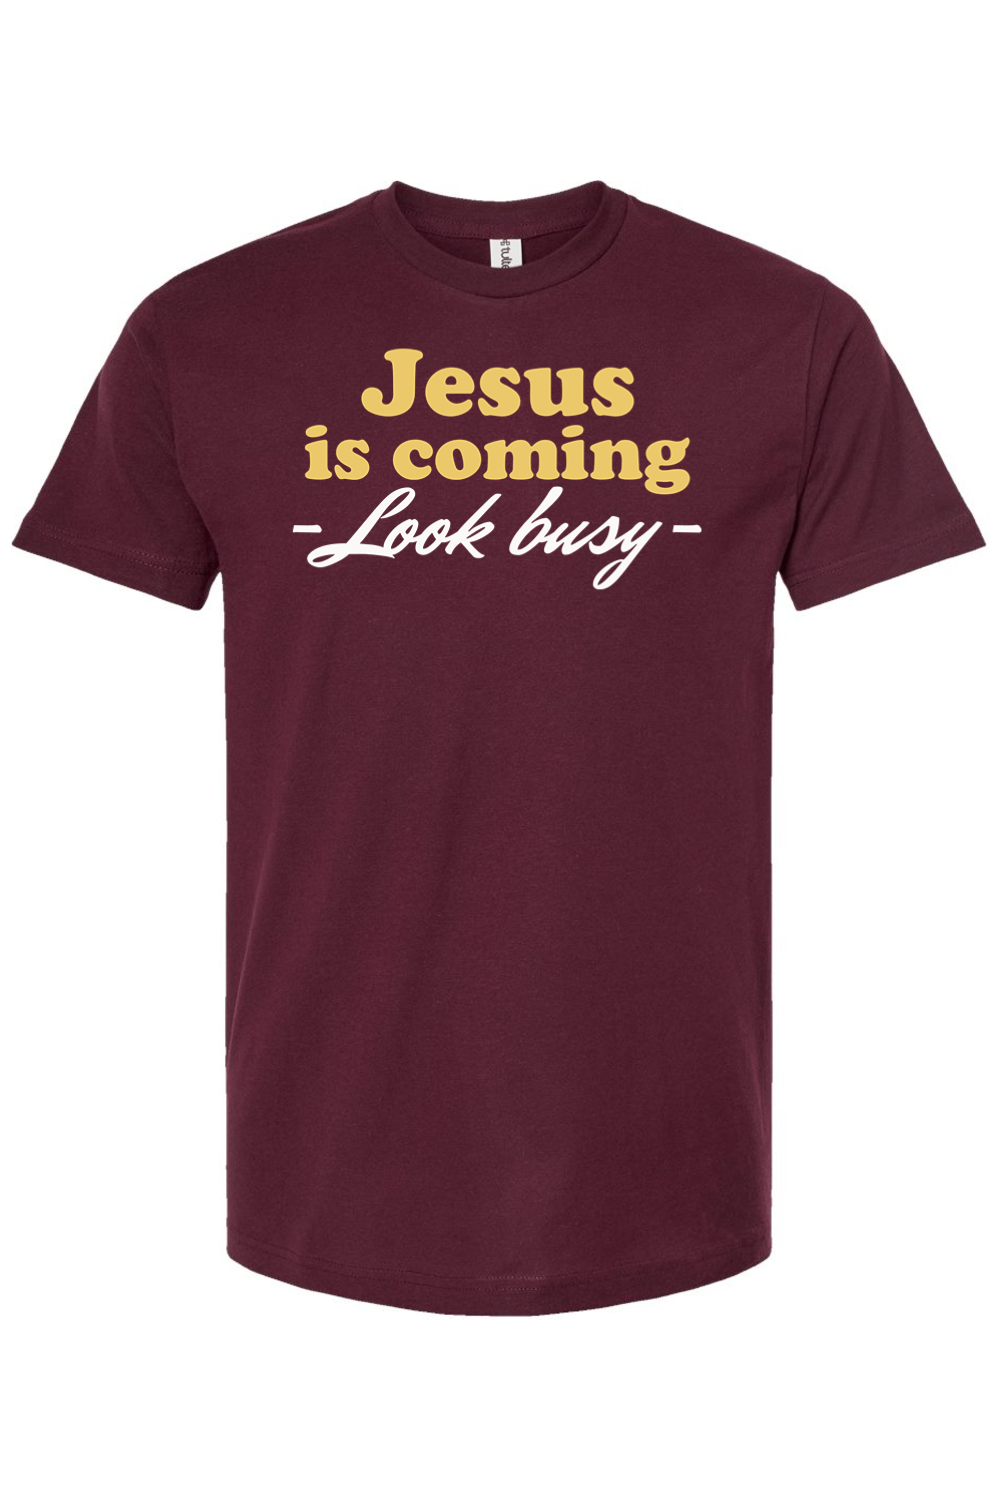 Jesus is Coming - Look Busy - T-Shirt